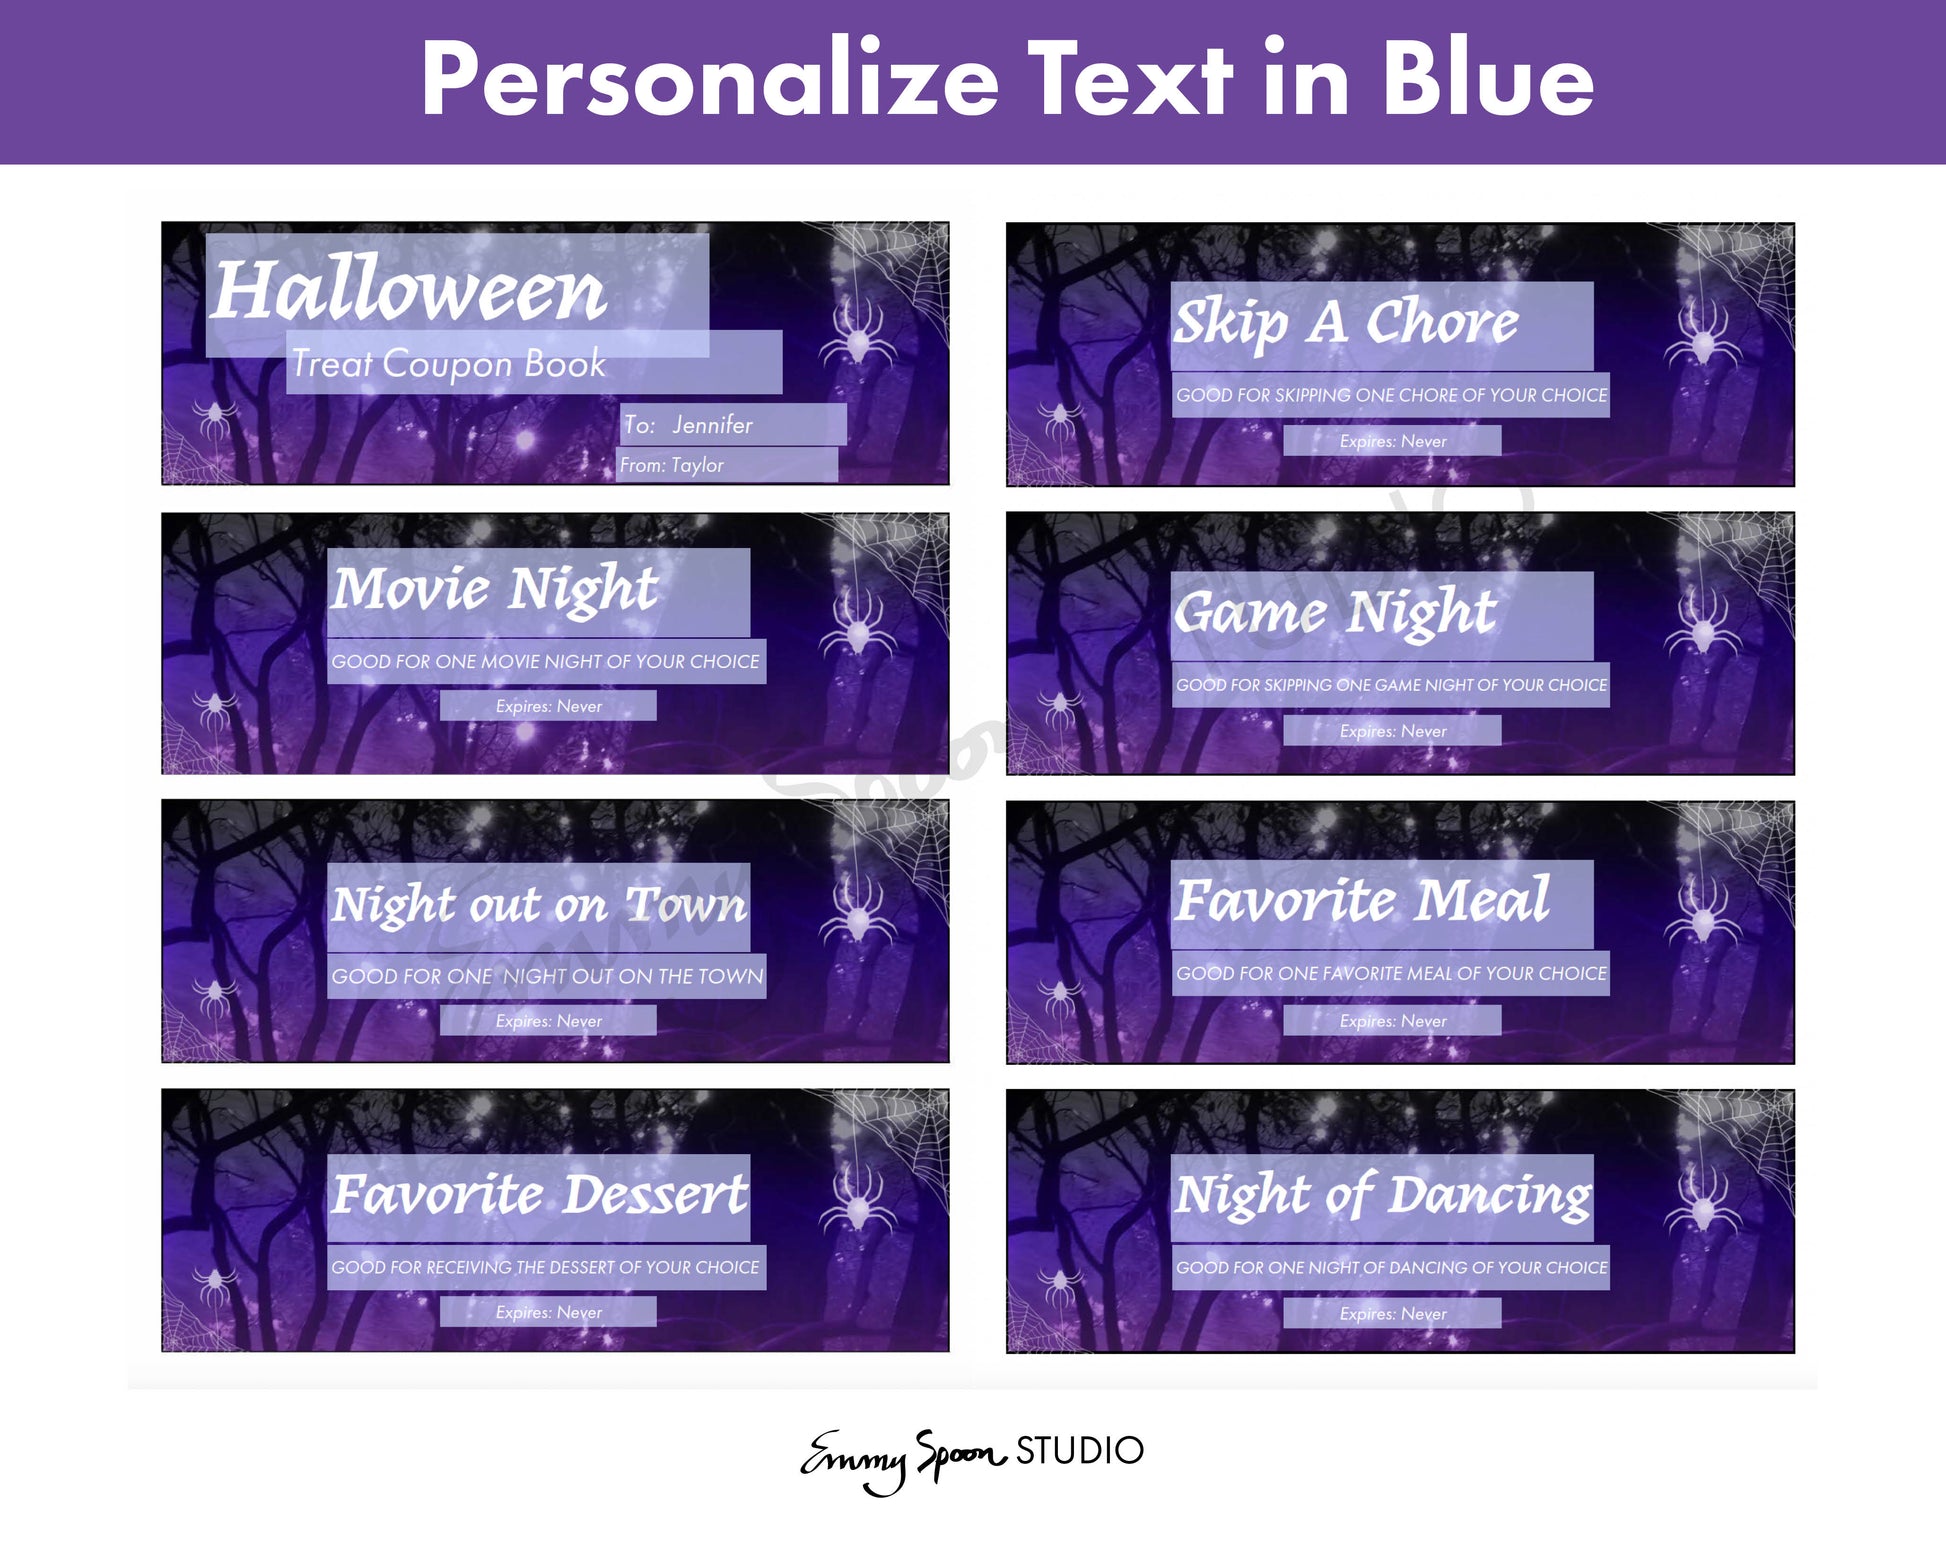 Text in Blue is Editable by Emmy Spoon Studio